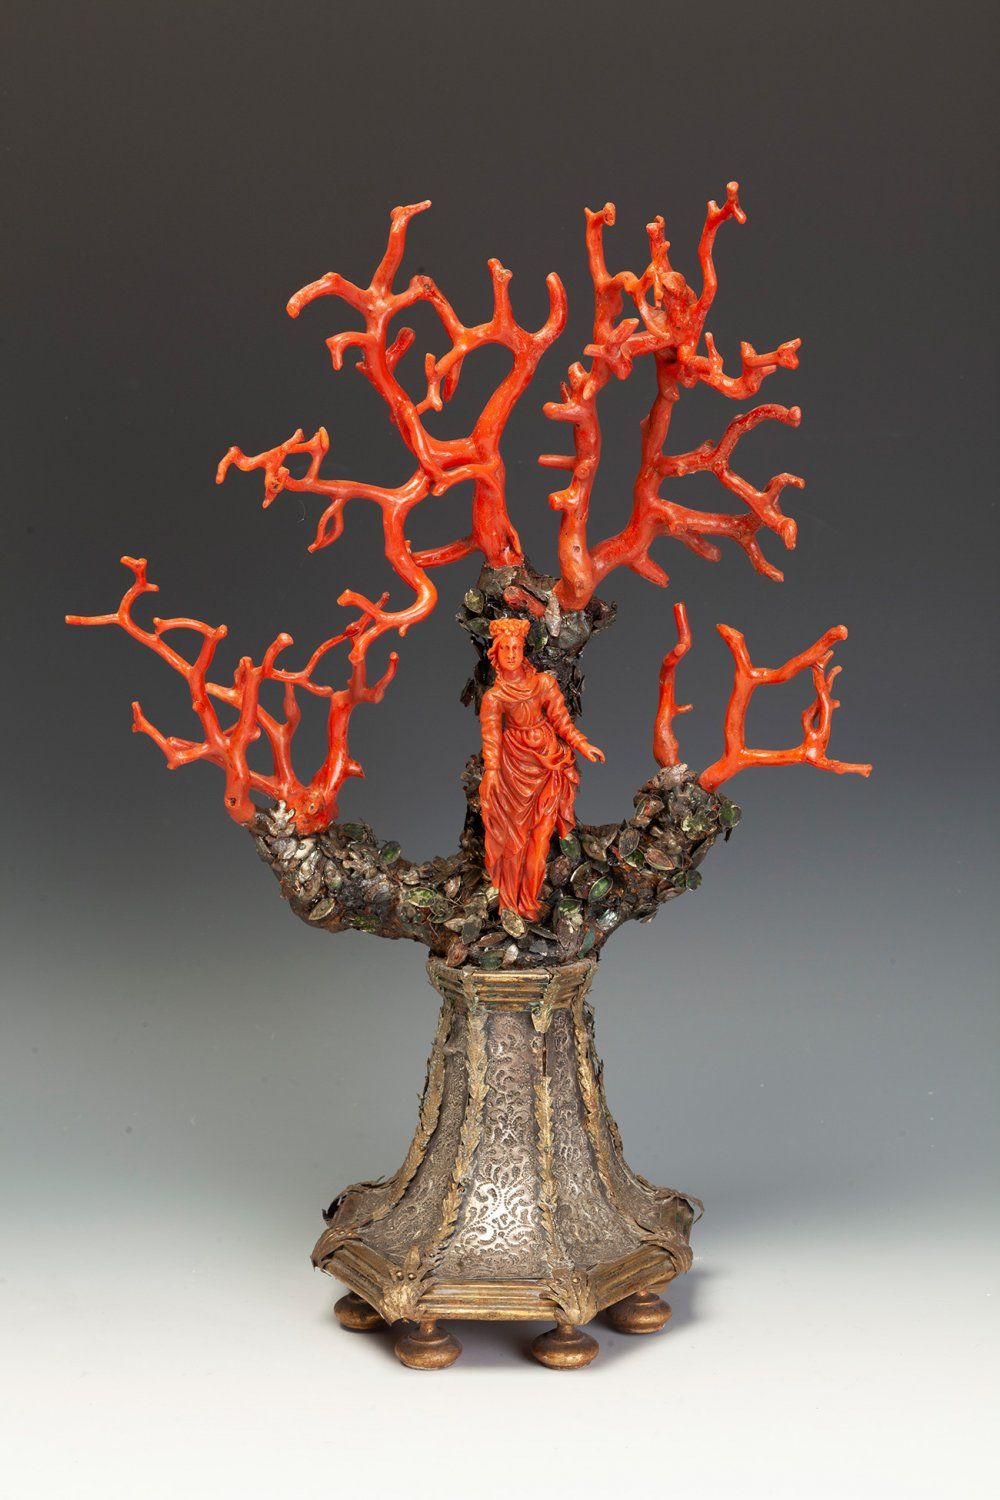 Null Group with statuette and branches in red coralinum, 17th century.
Carving i&hellip;